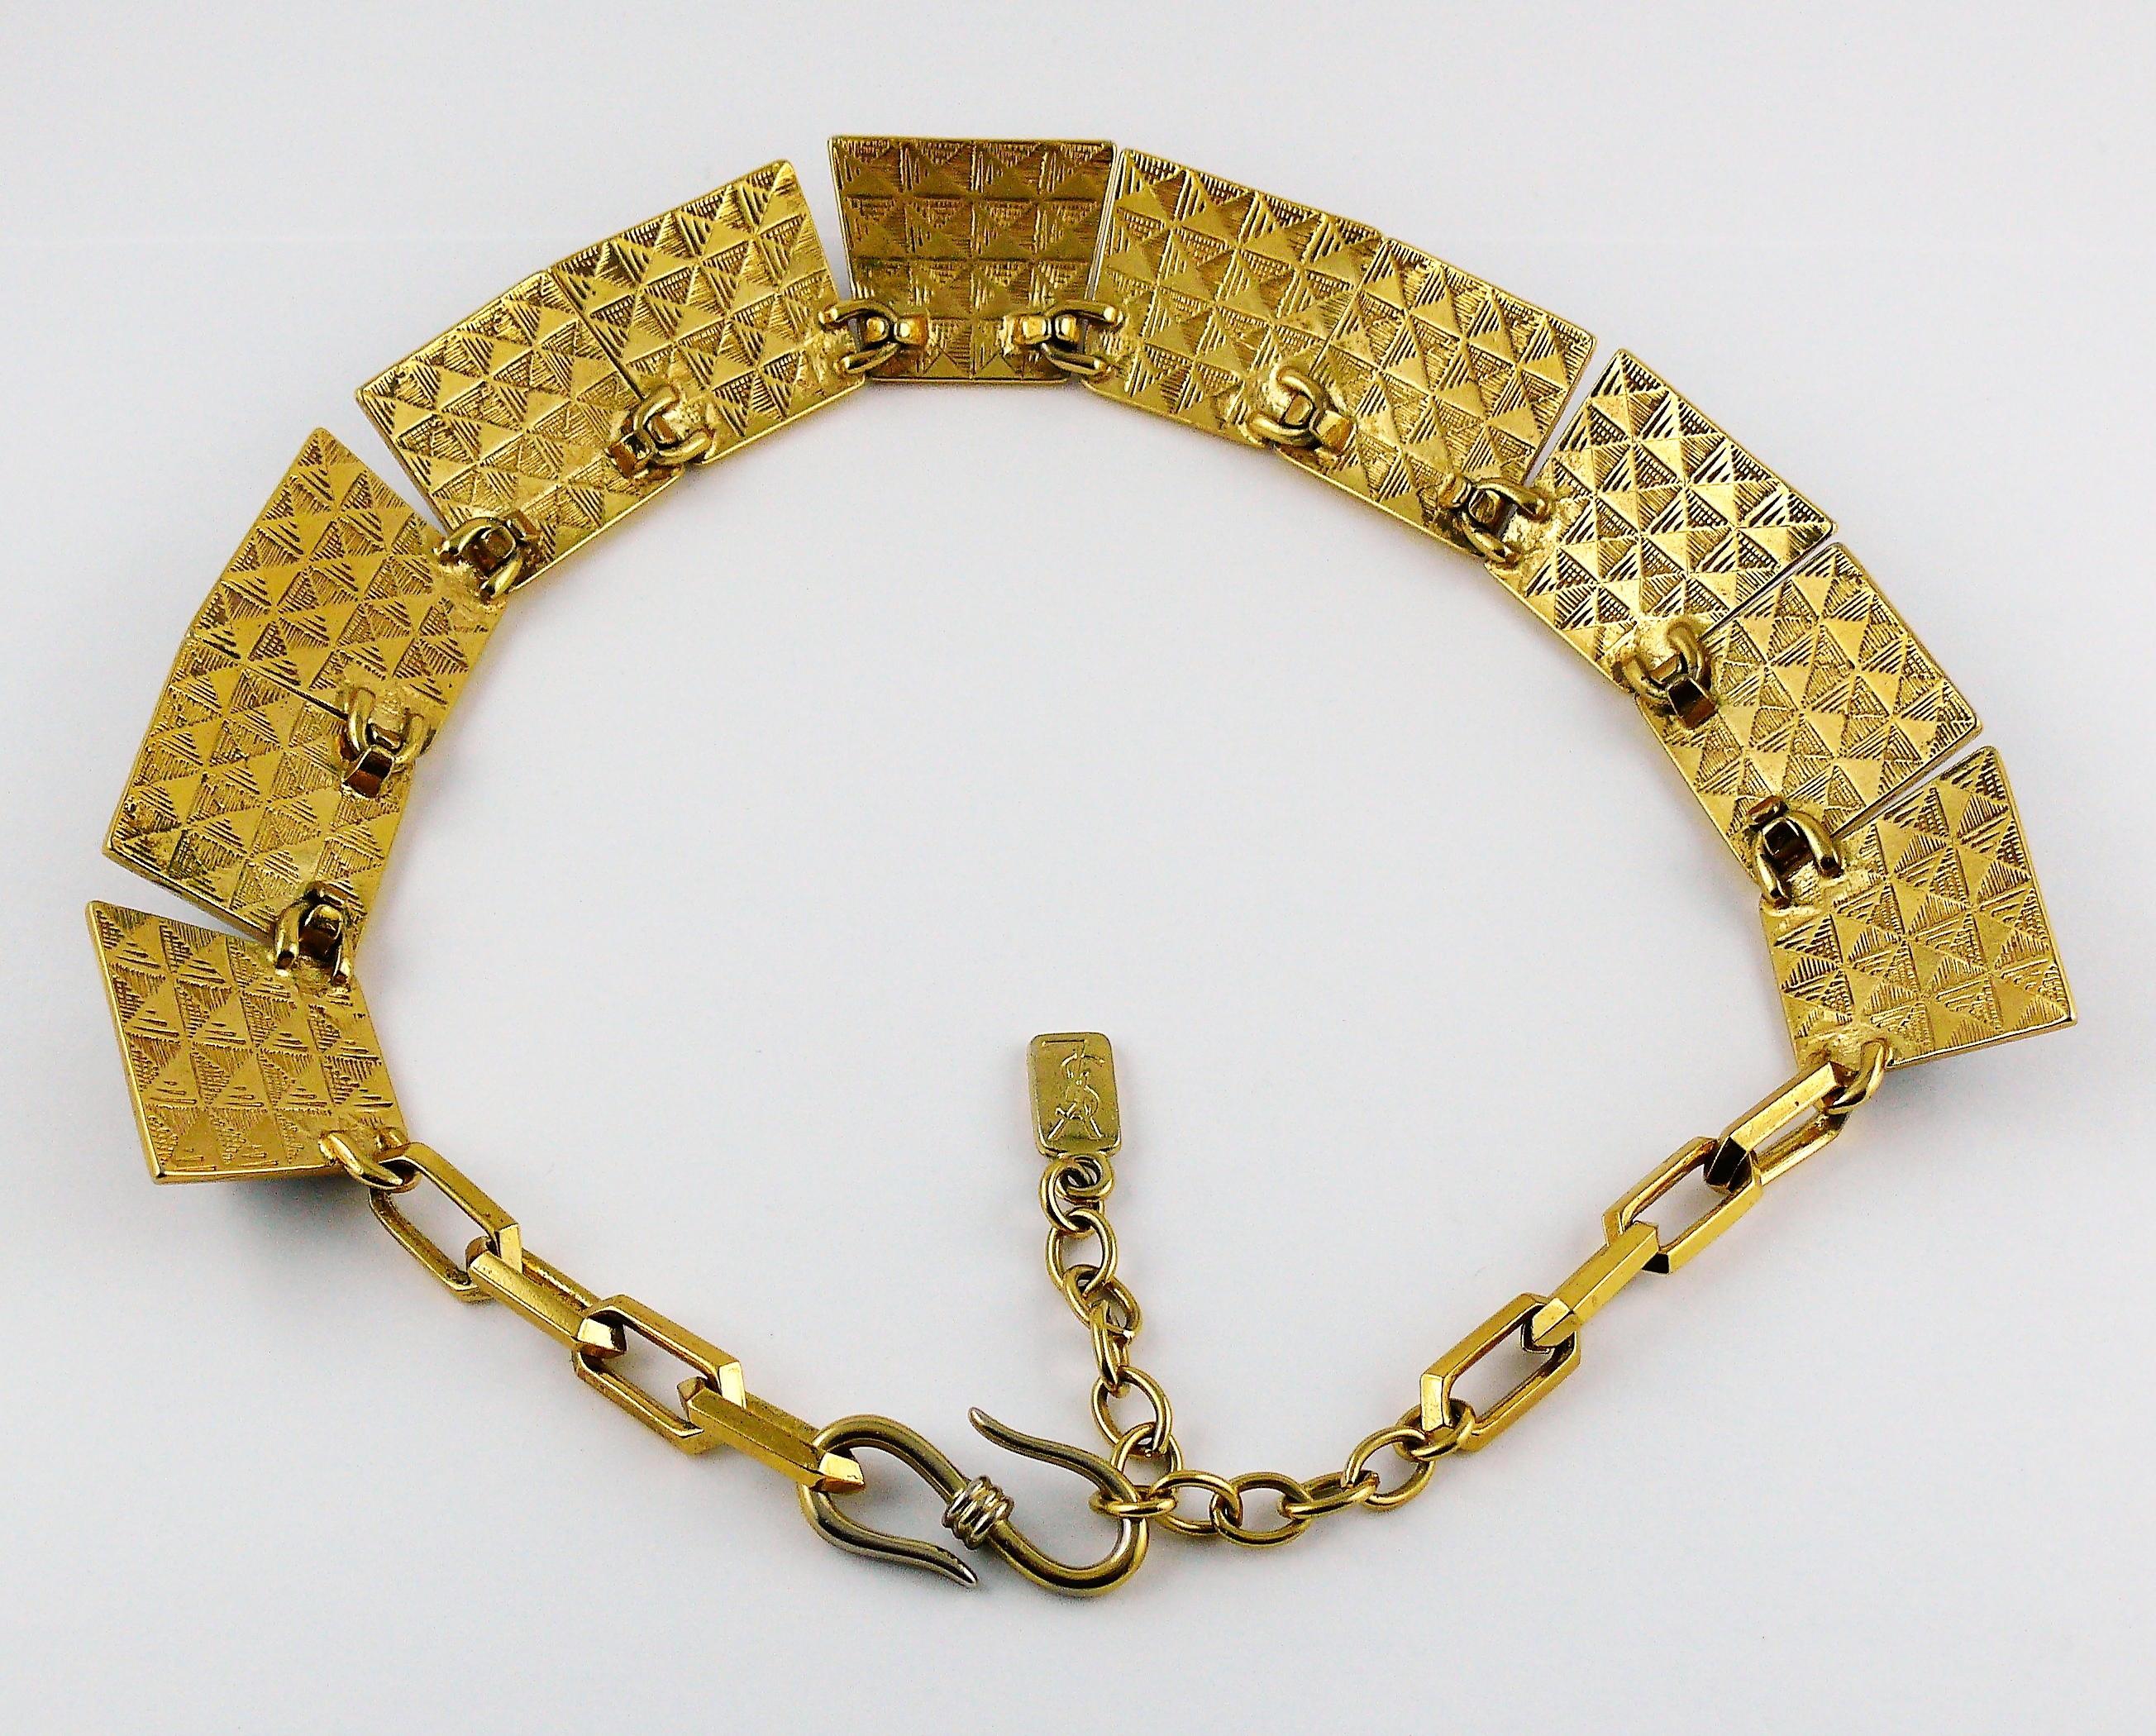 Yves Saint Laurent YSL Vintage Iconic Leopard Pyramid Necklace For Sale 4